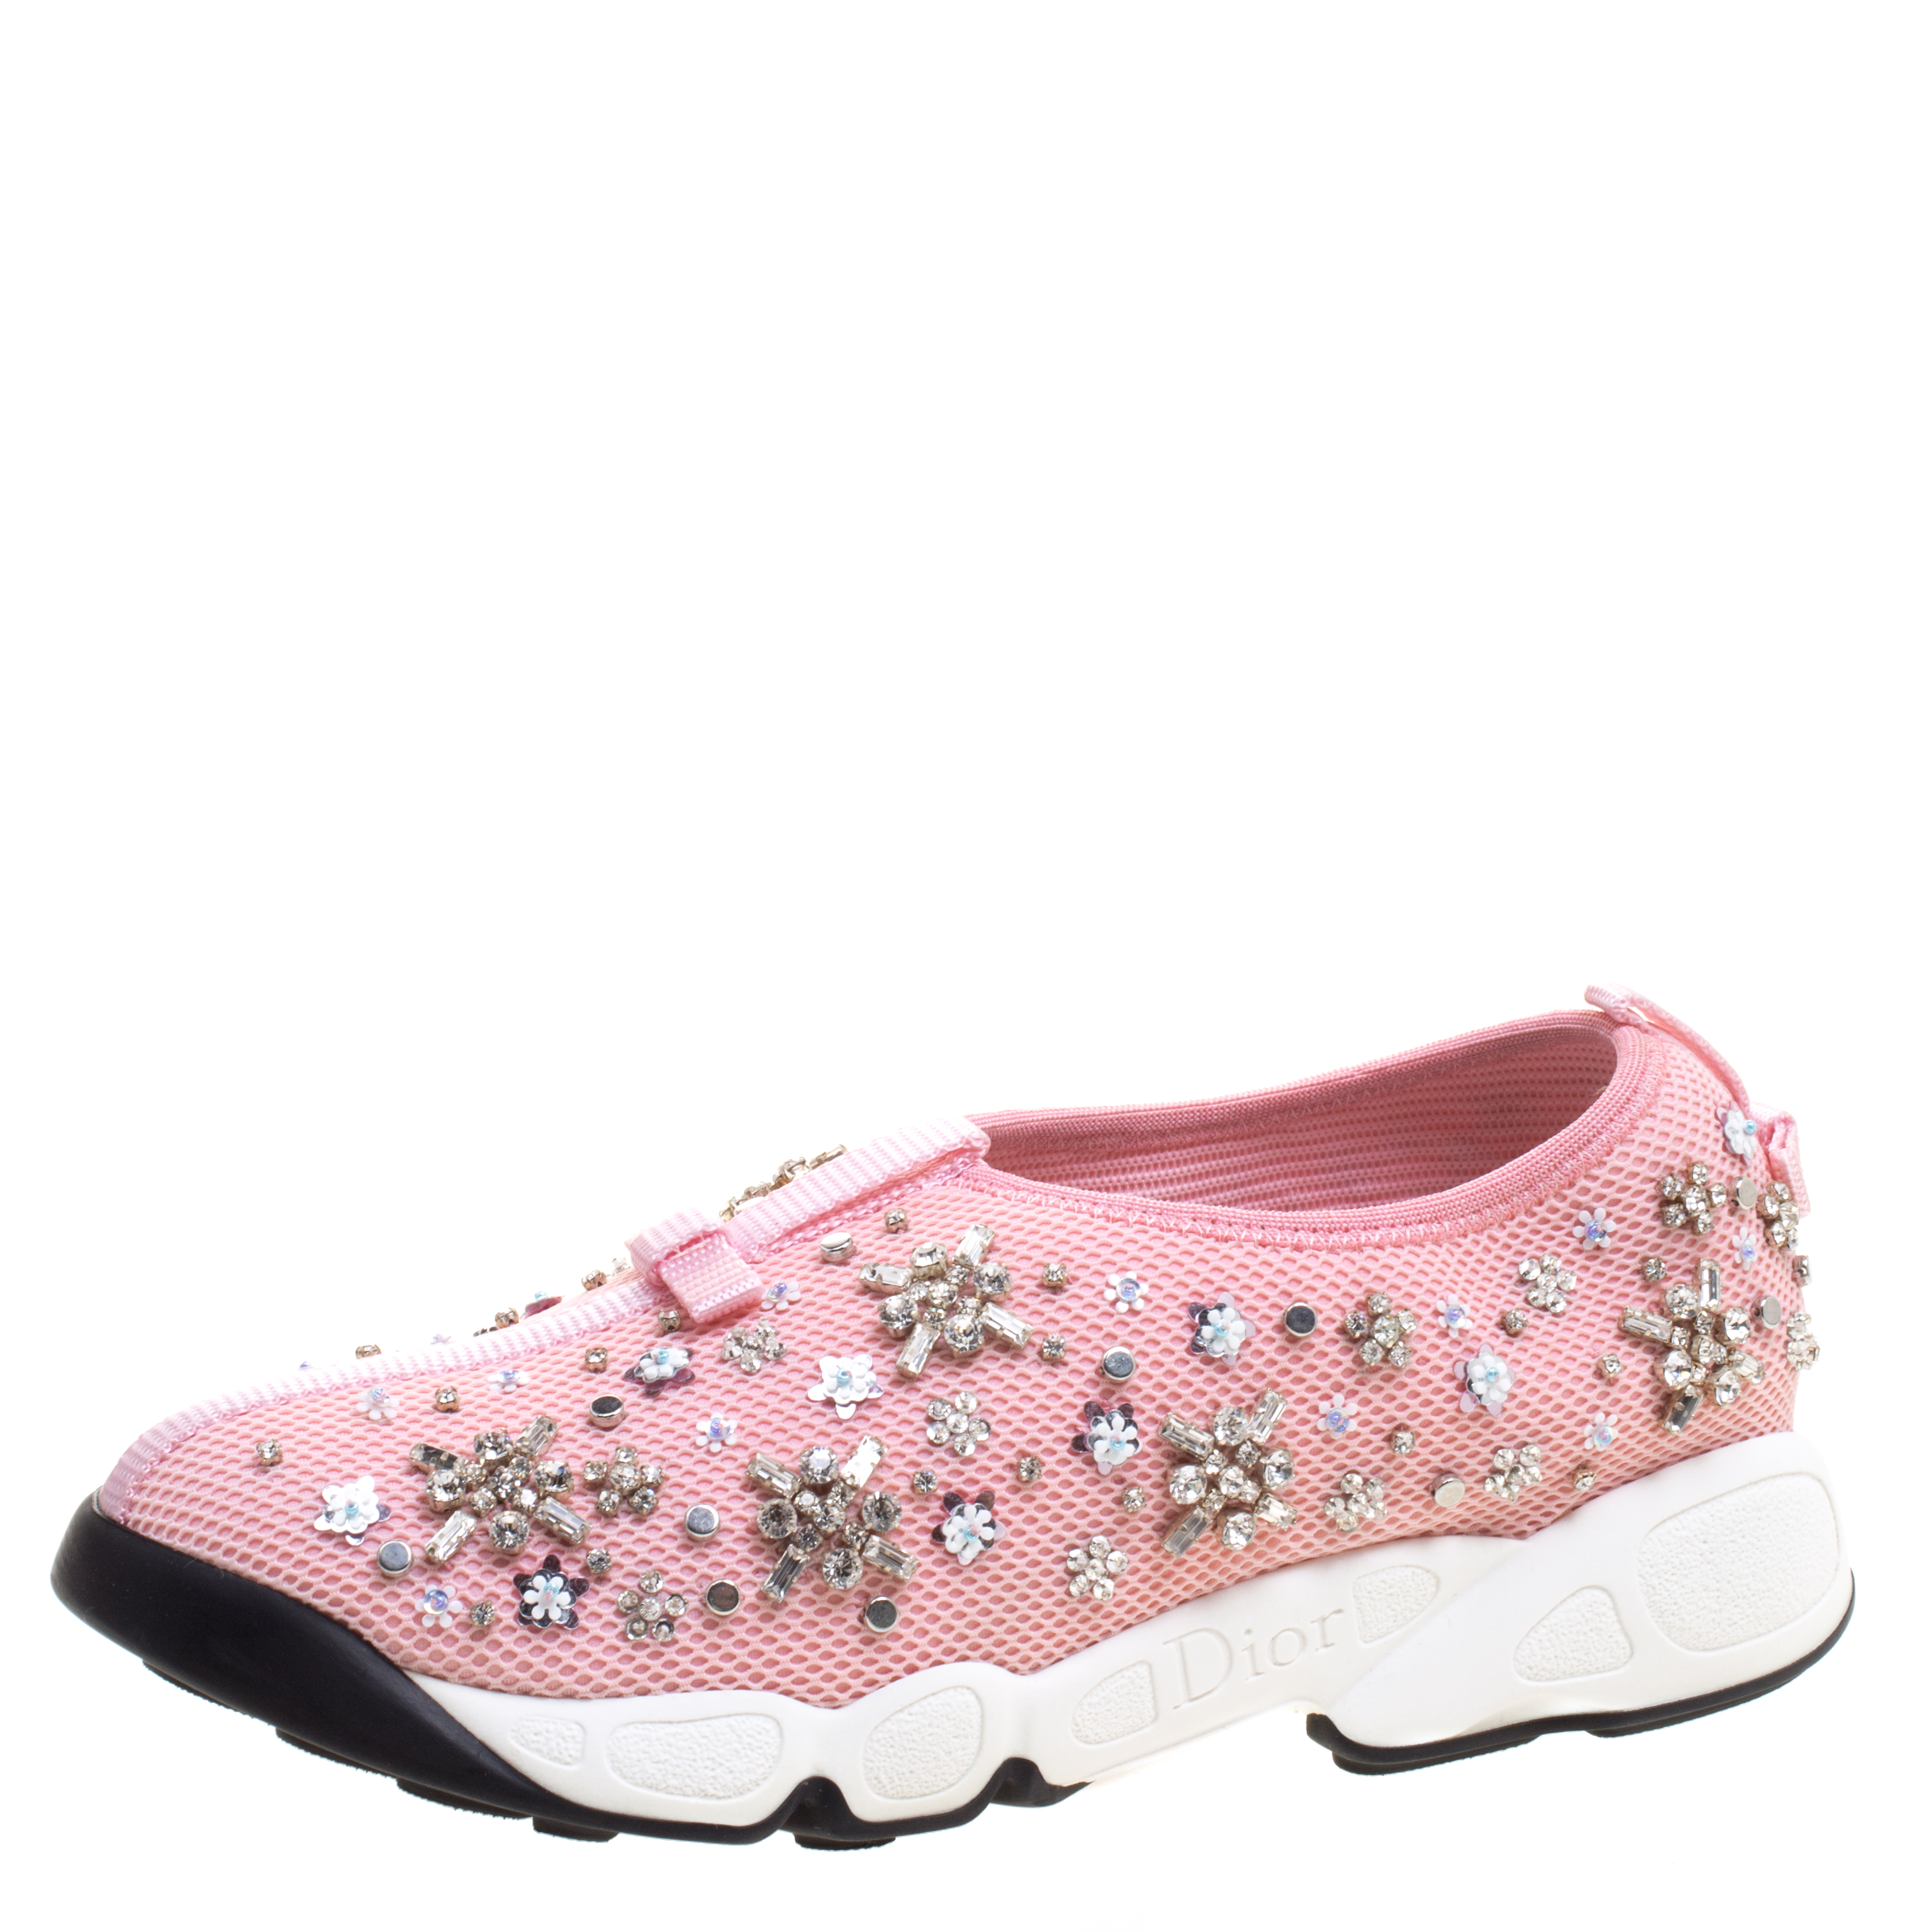 Dior Pink Mesh Fusion Embellished Sneakers Size 37 Dior | TLC